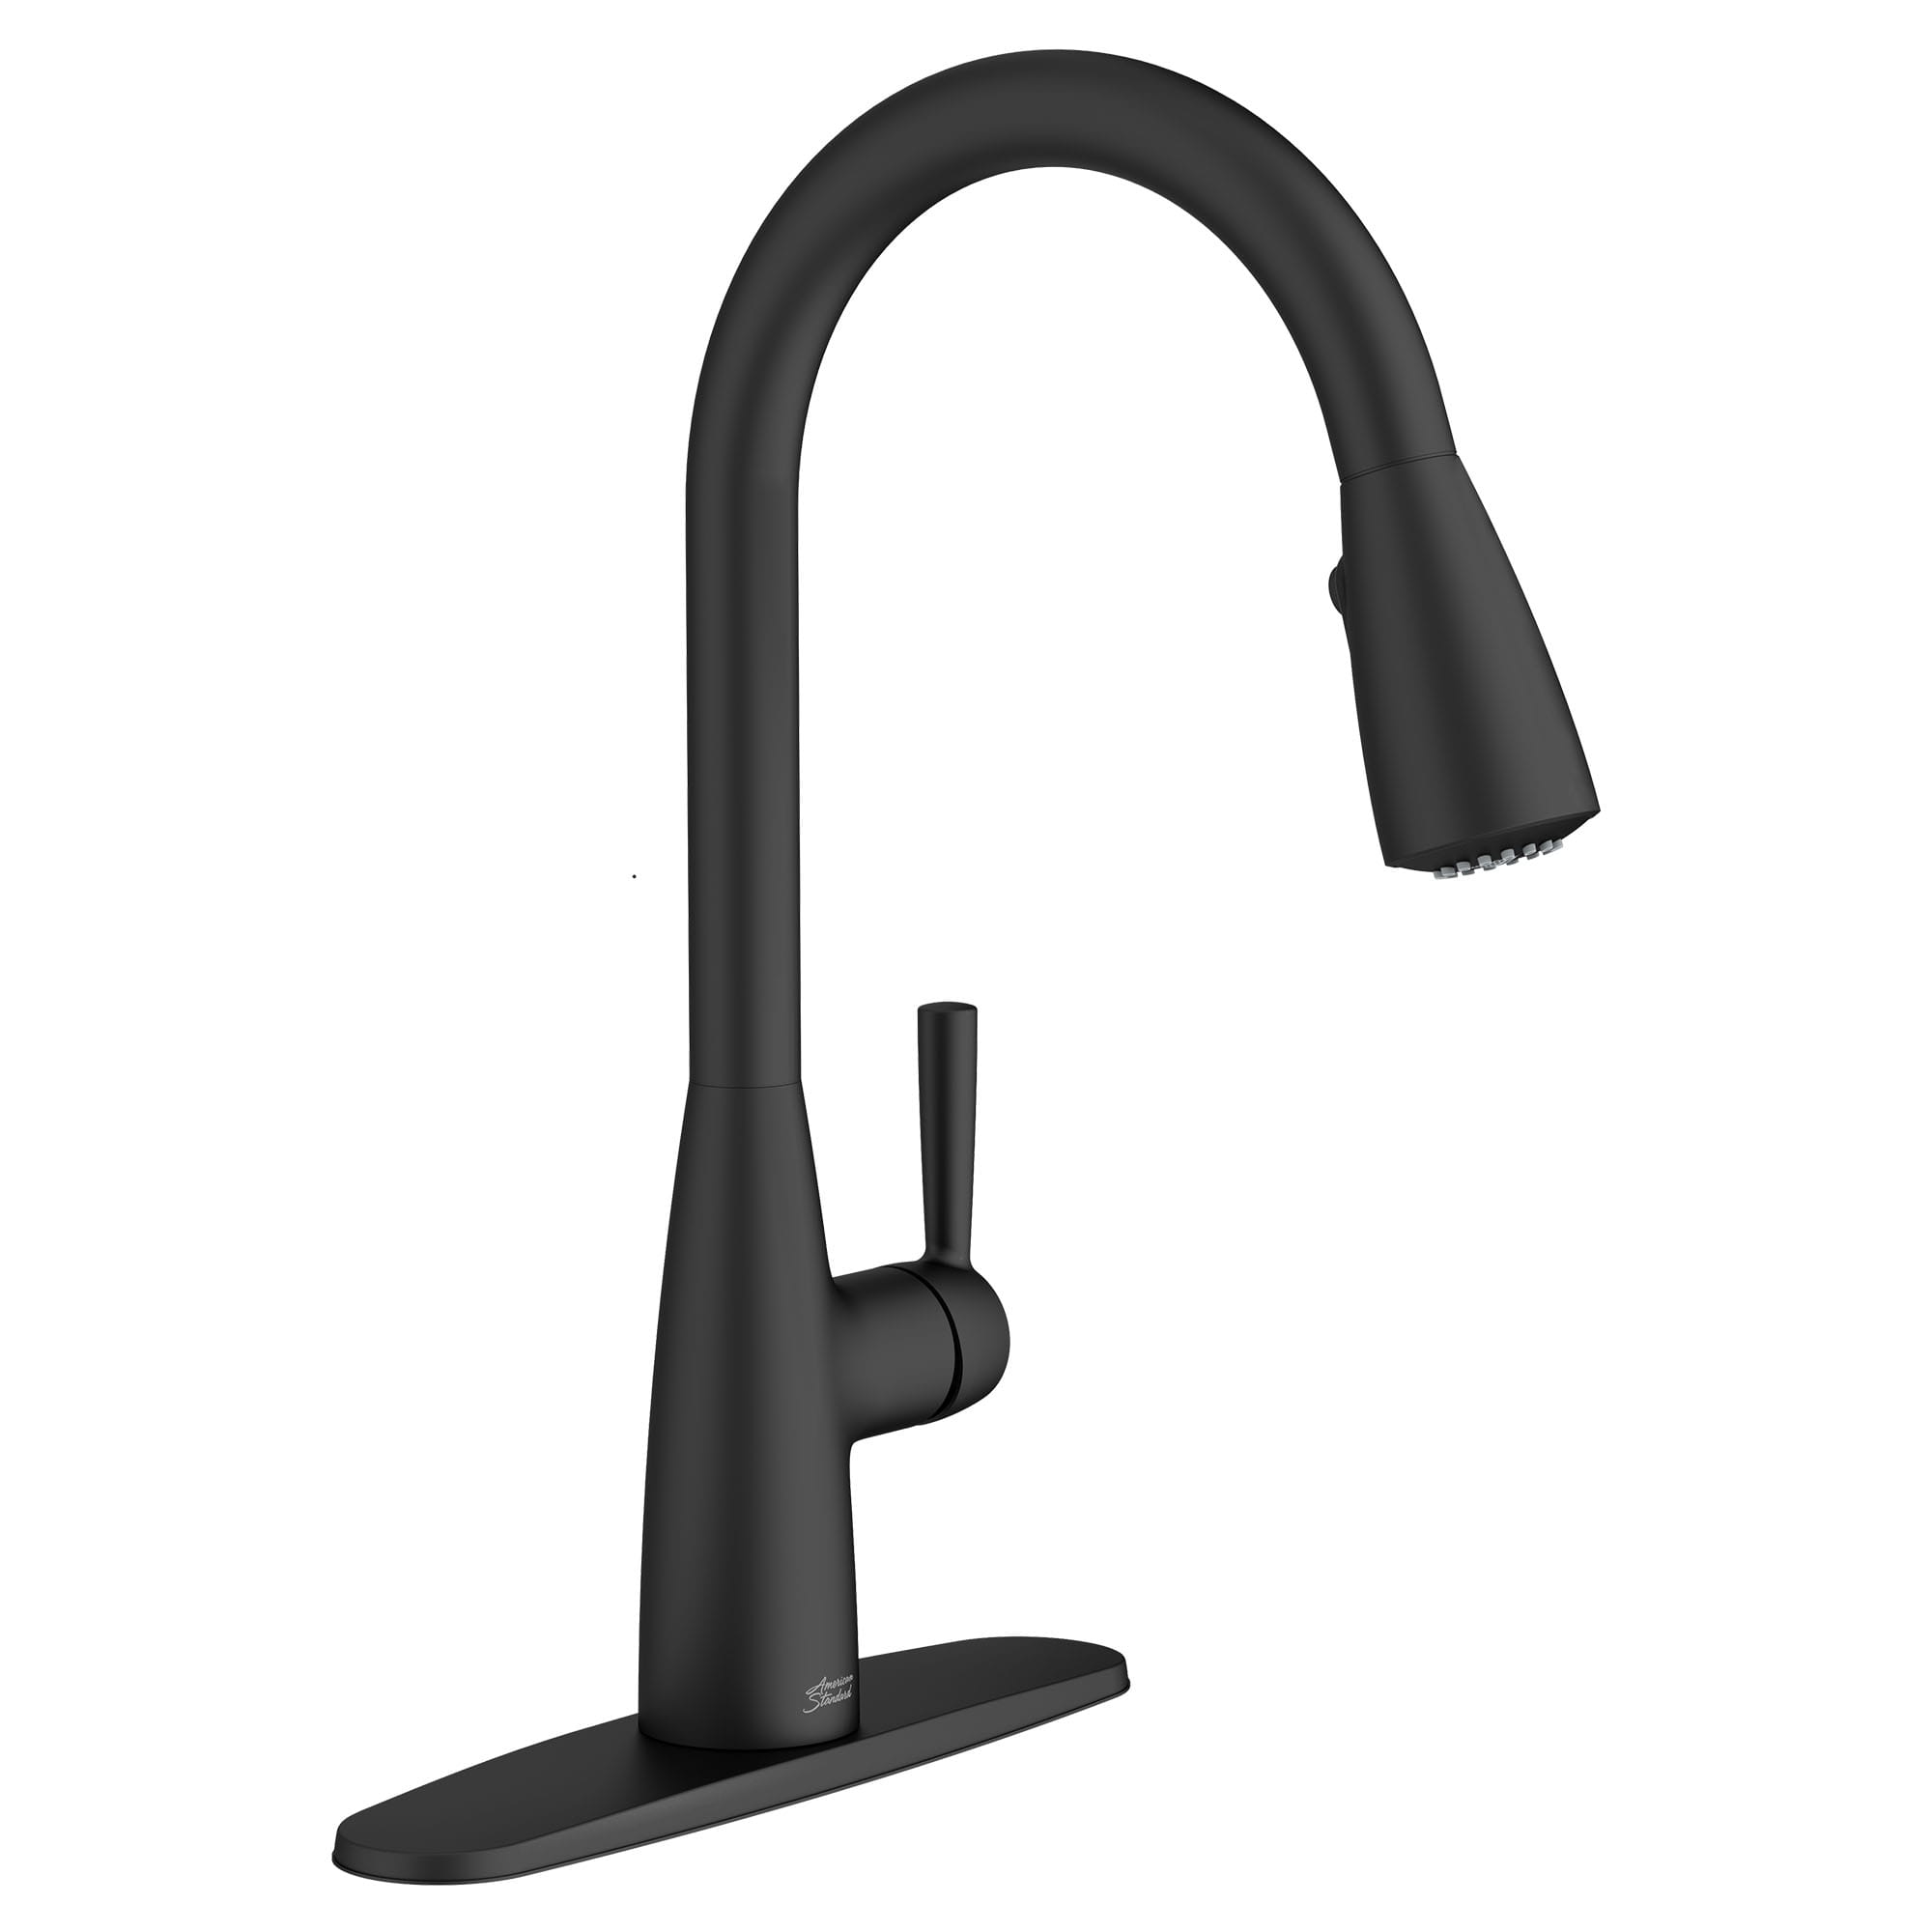 Fairbury® Single-Handle Pull-Down Dual Spray Kitchen Faucet 1.8 gpm/6.8 L/min With Lever Handle